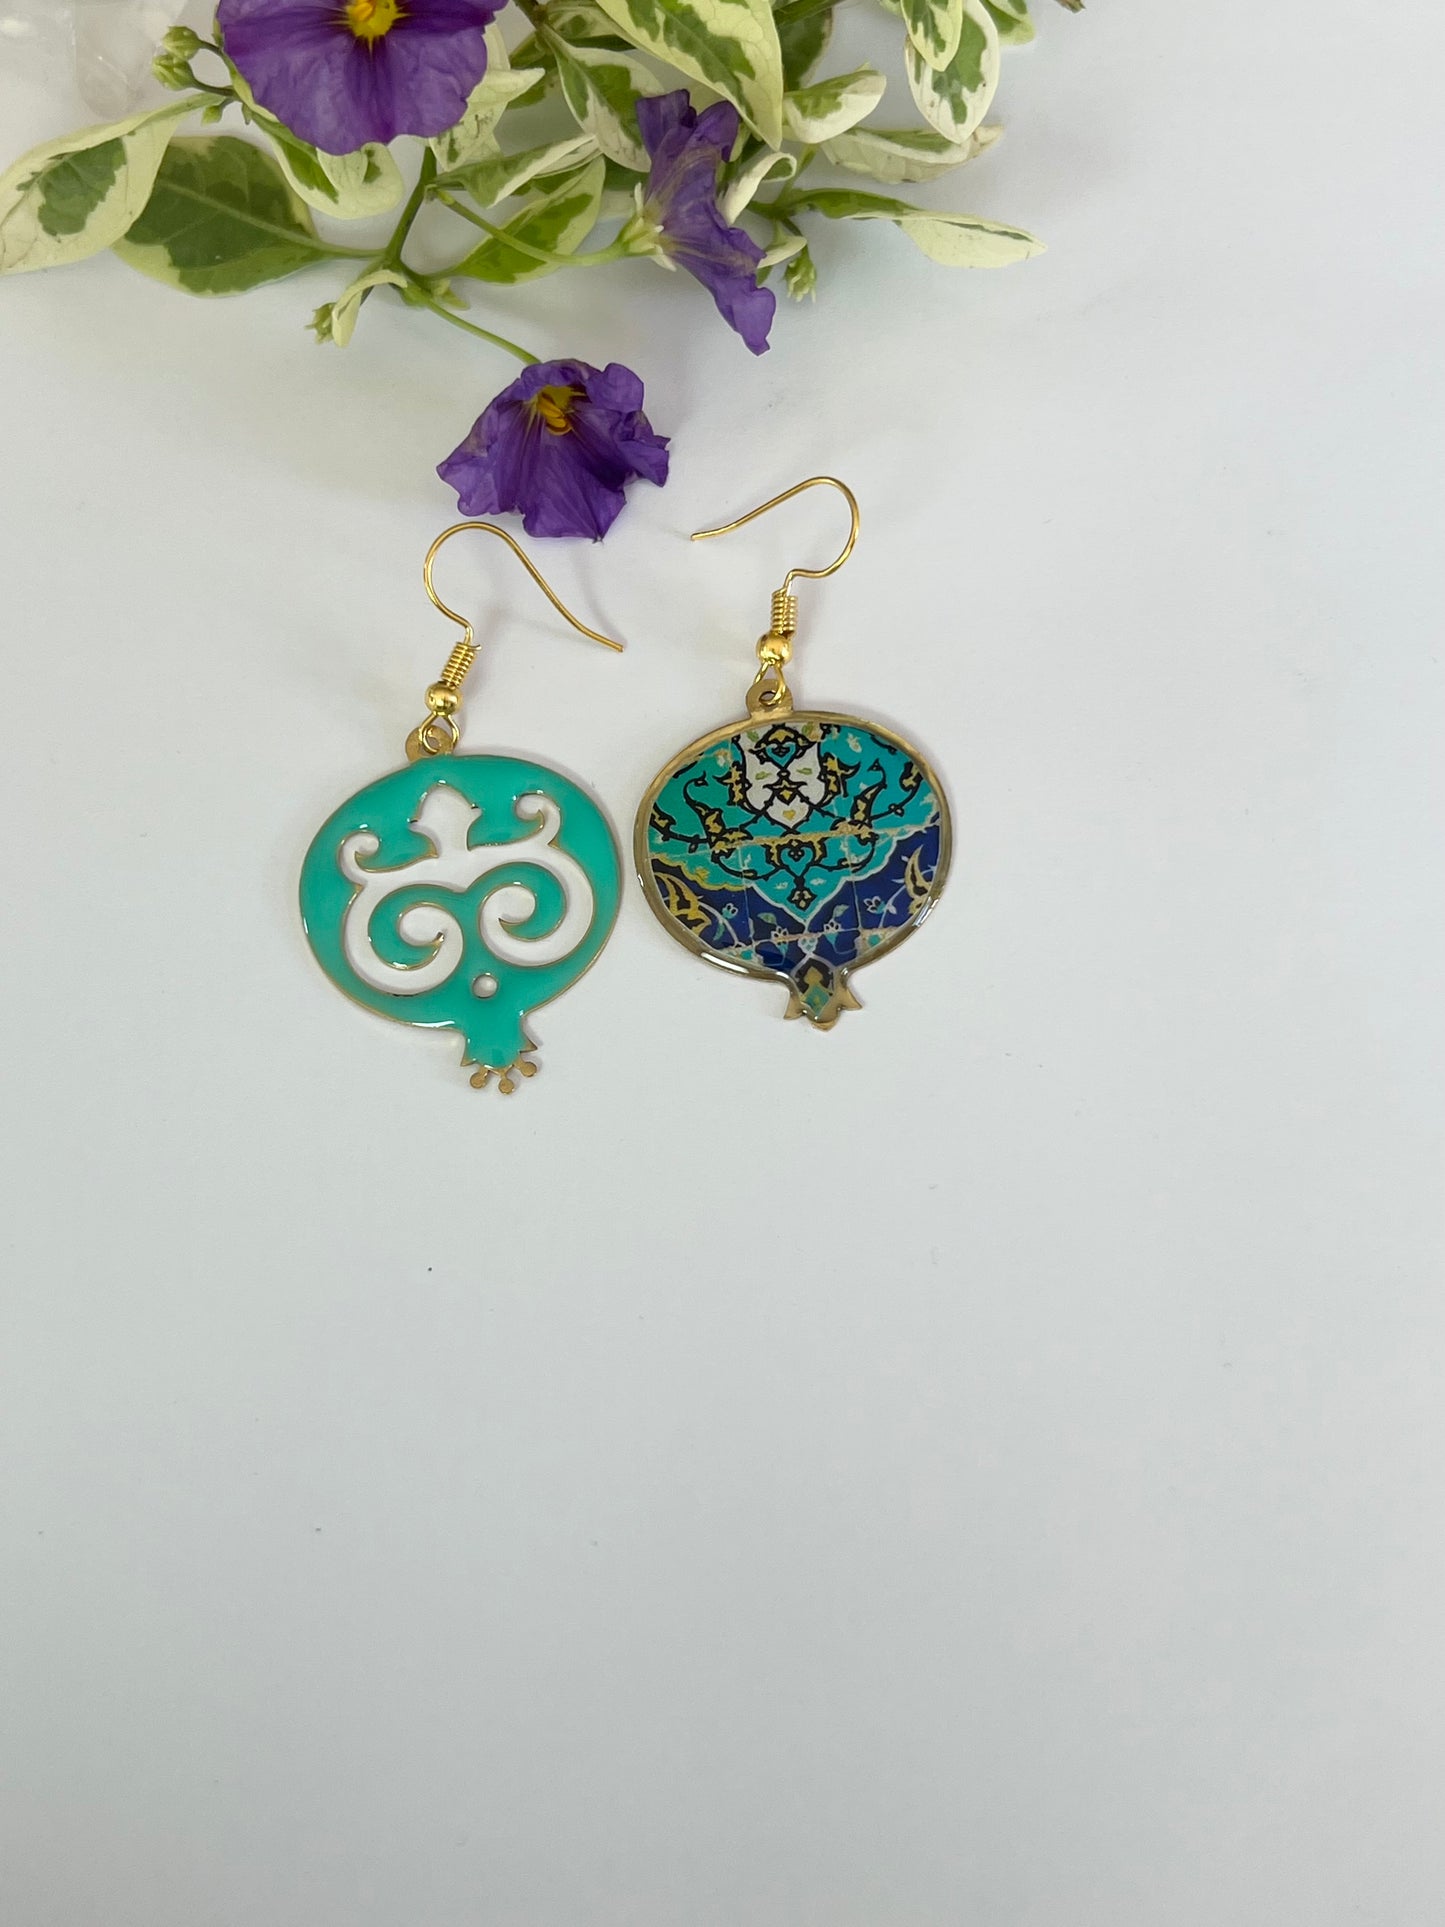 Turquoise and Blue Pomegranate Mismatched Earrings